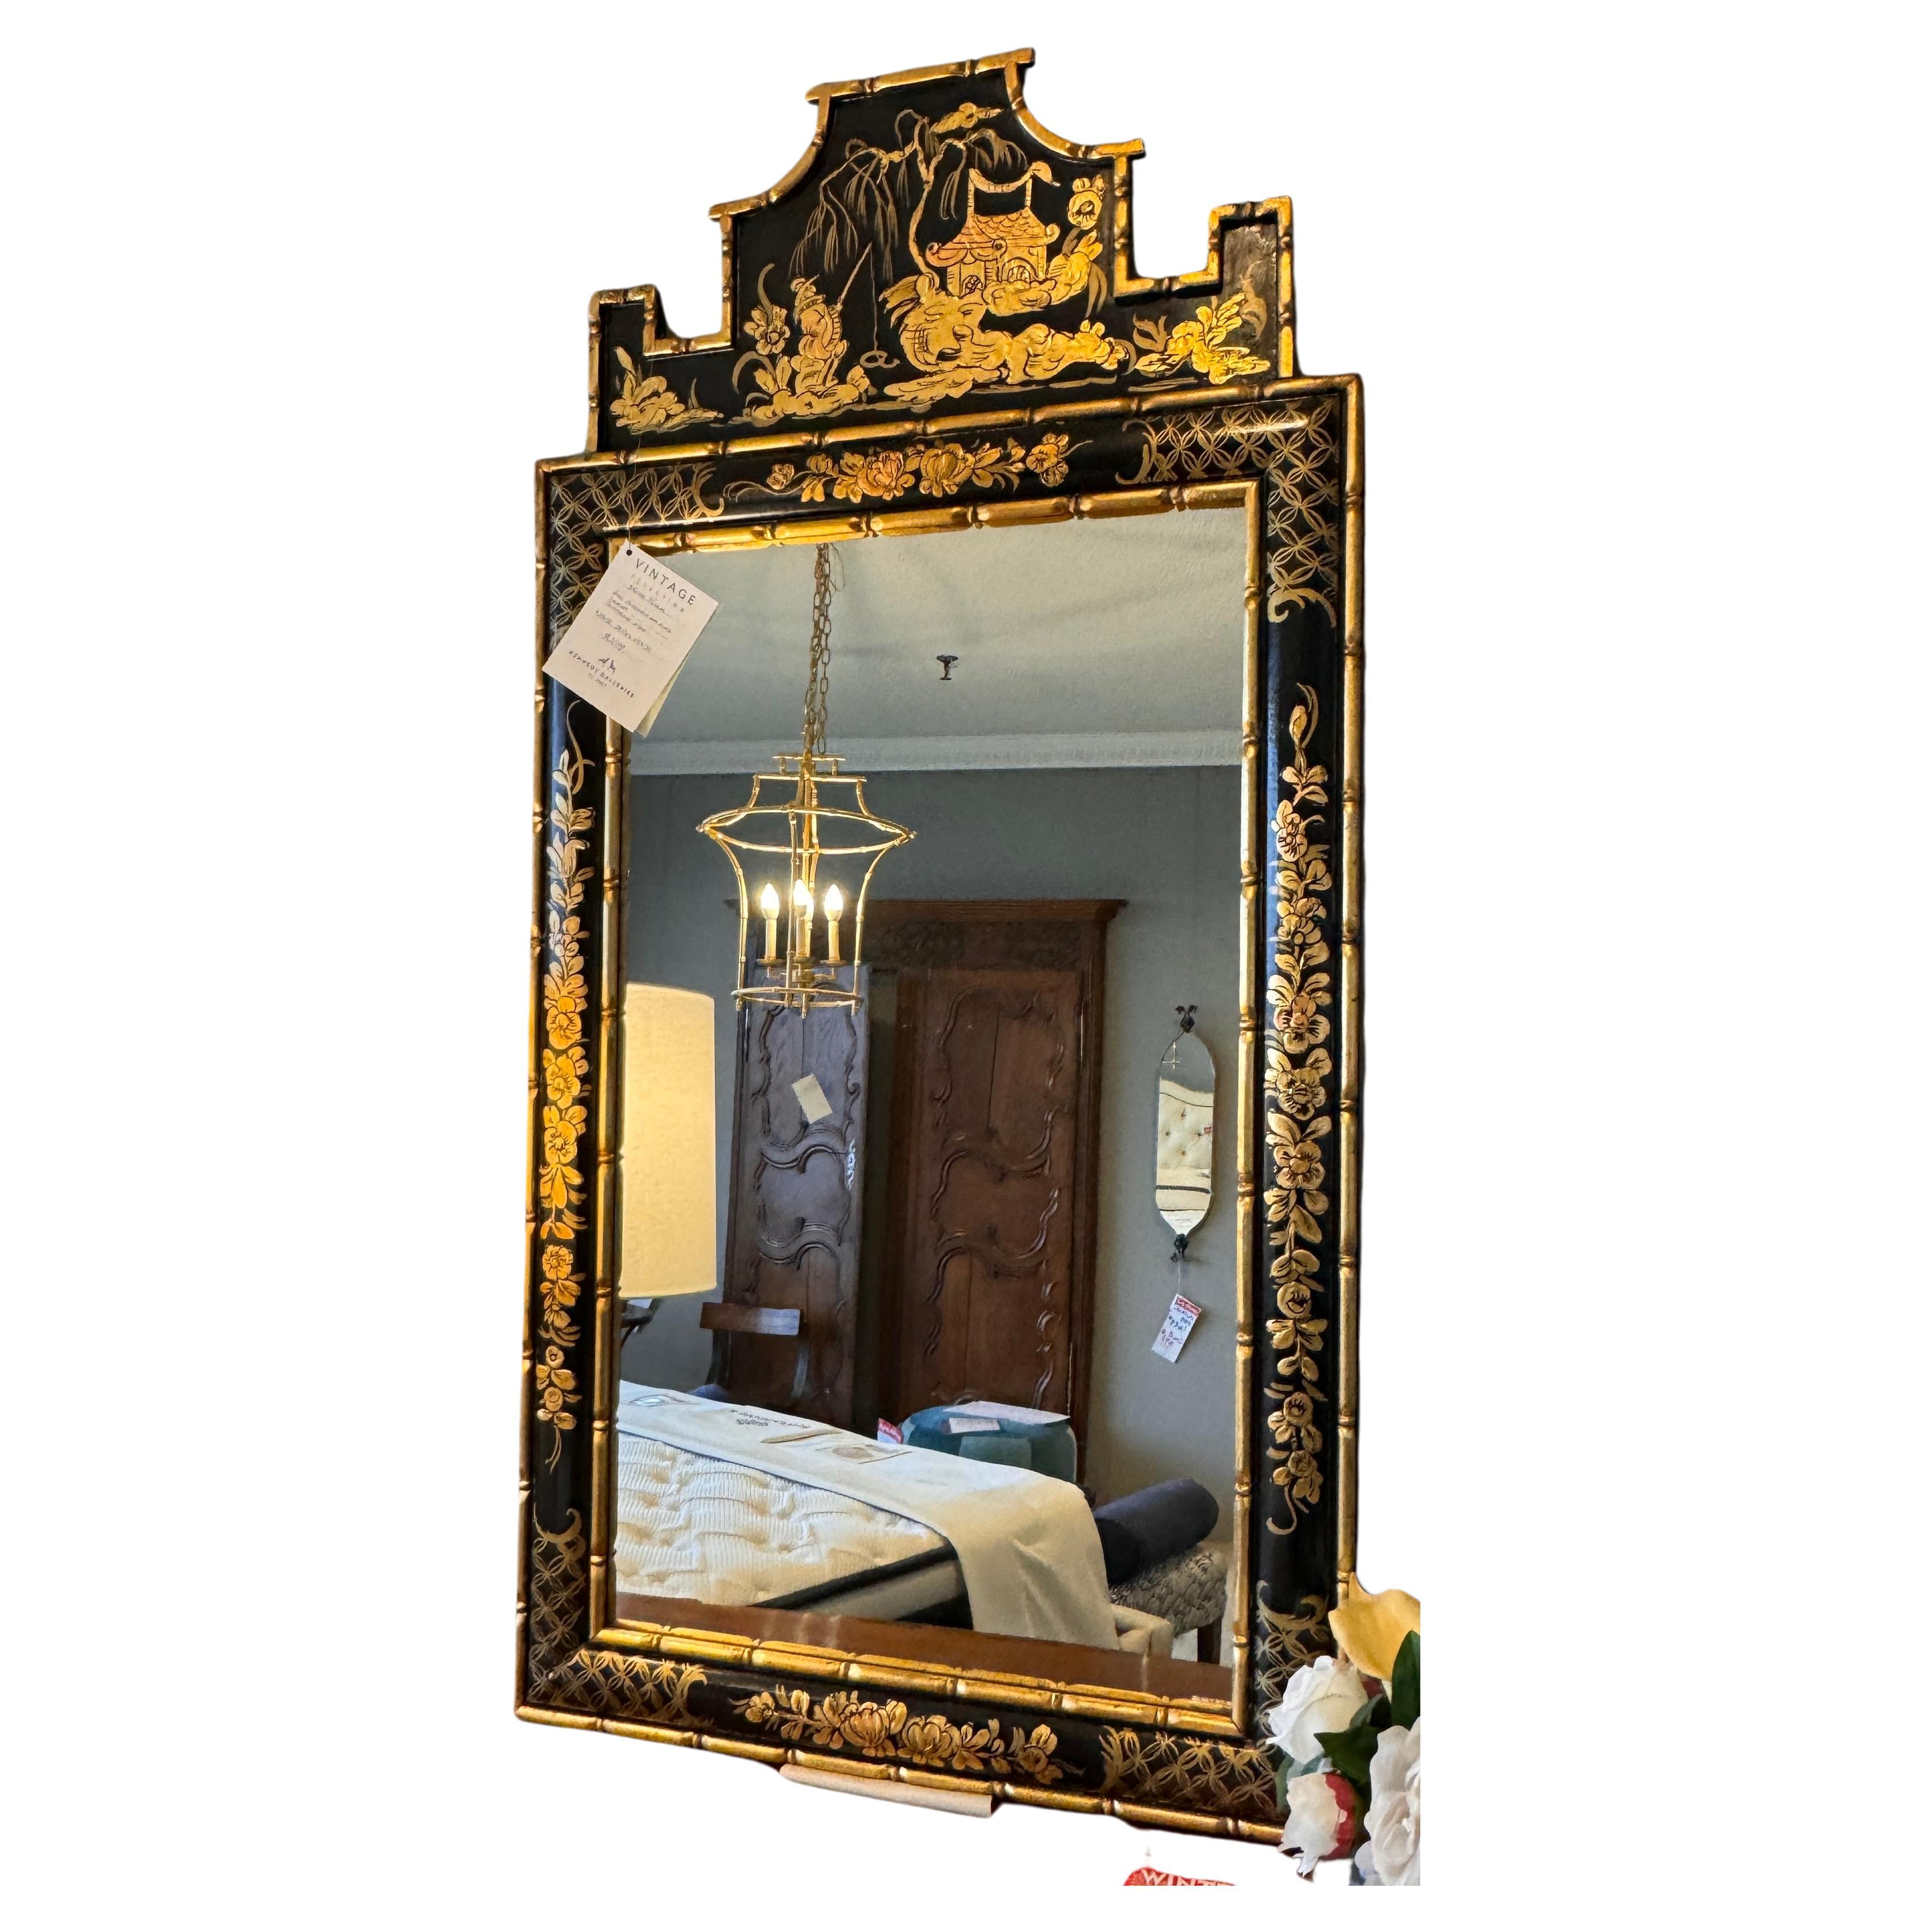 Introducing our exquisite black lacquer mirror, a stunning embodiment of Chippendale elegance infused with captivating chinoiserie details. Crafted with details inspired by traditional Chinese motifs, creating a mesmerizing fusion of